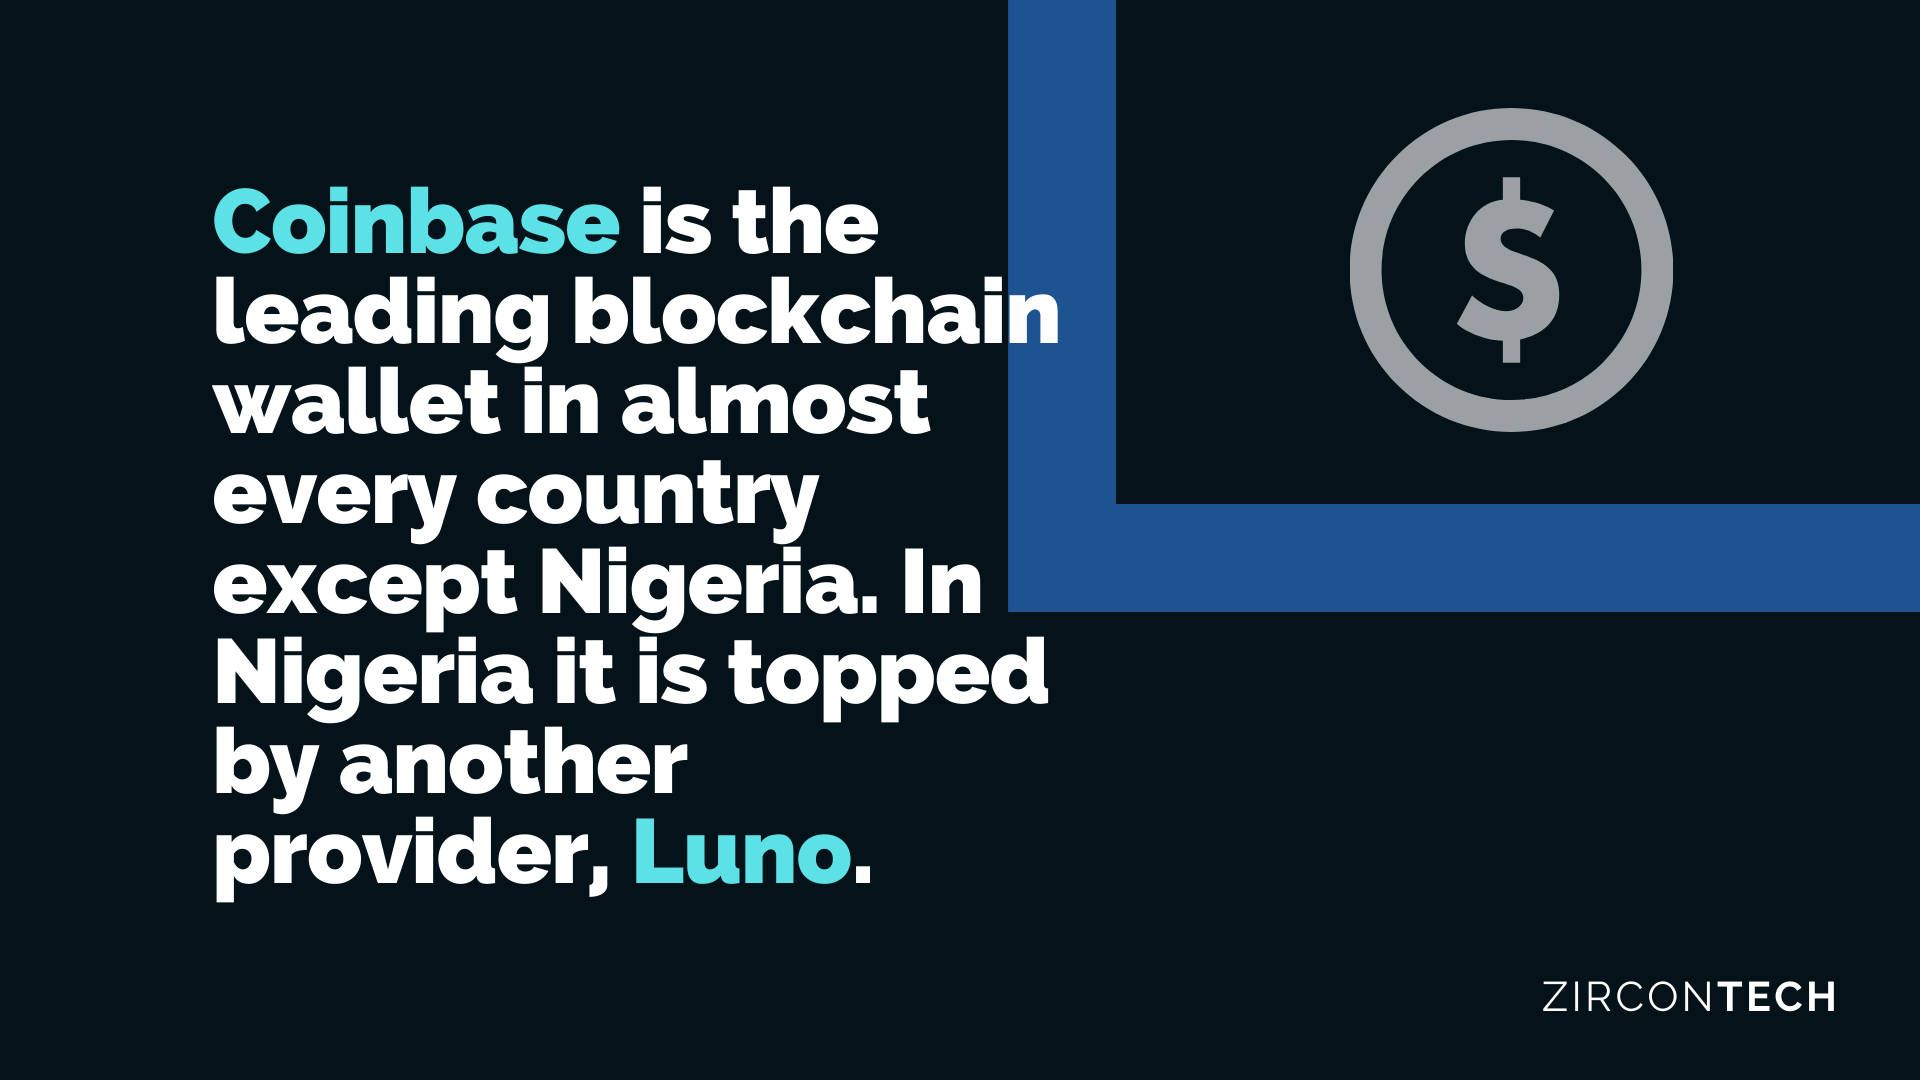 Coinbase is the leading blockchain wallet in almost every country. Luno is leading blockchain wallet in Nigeria